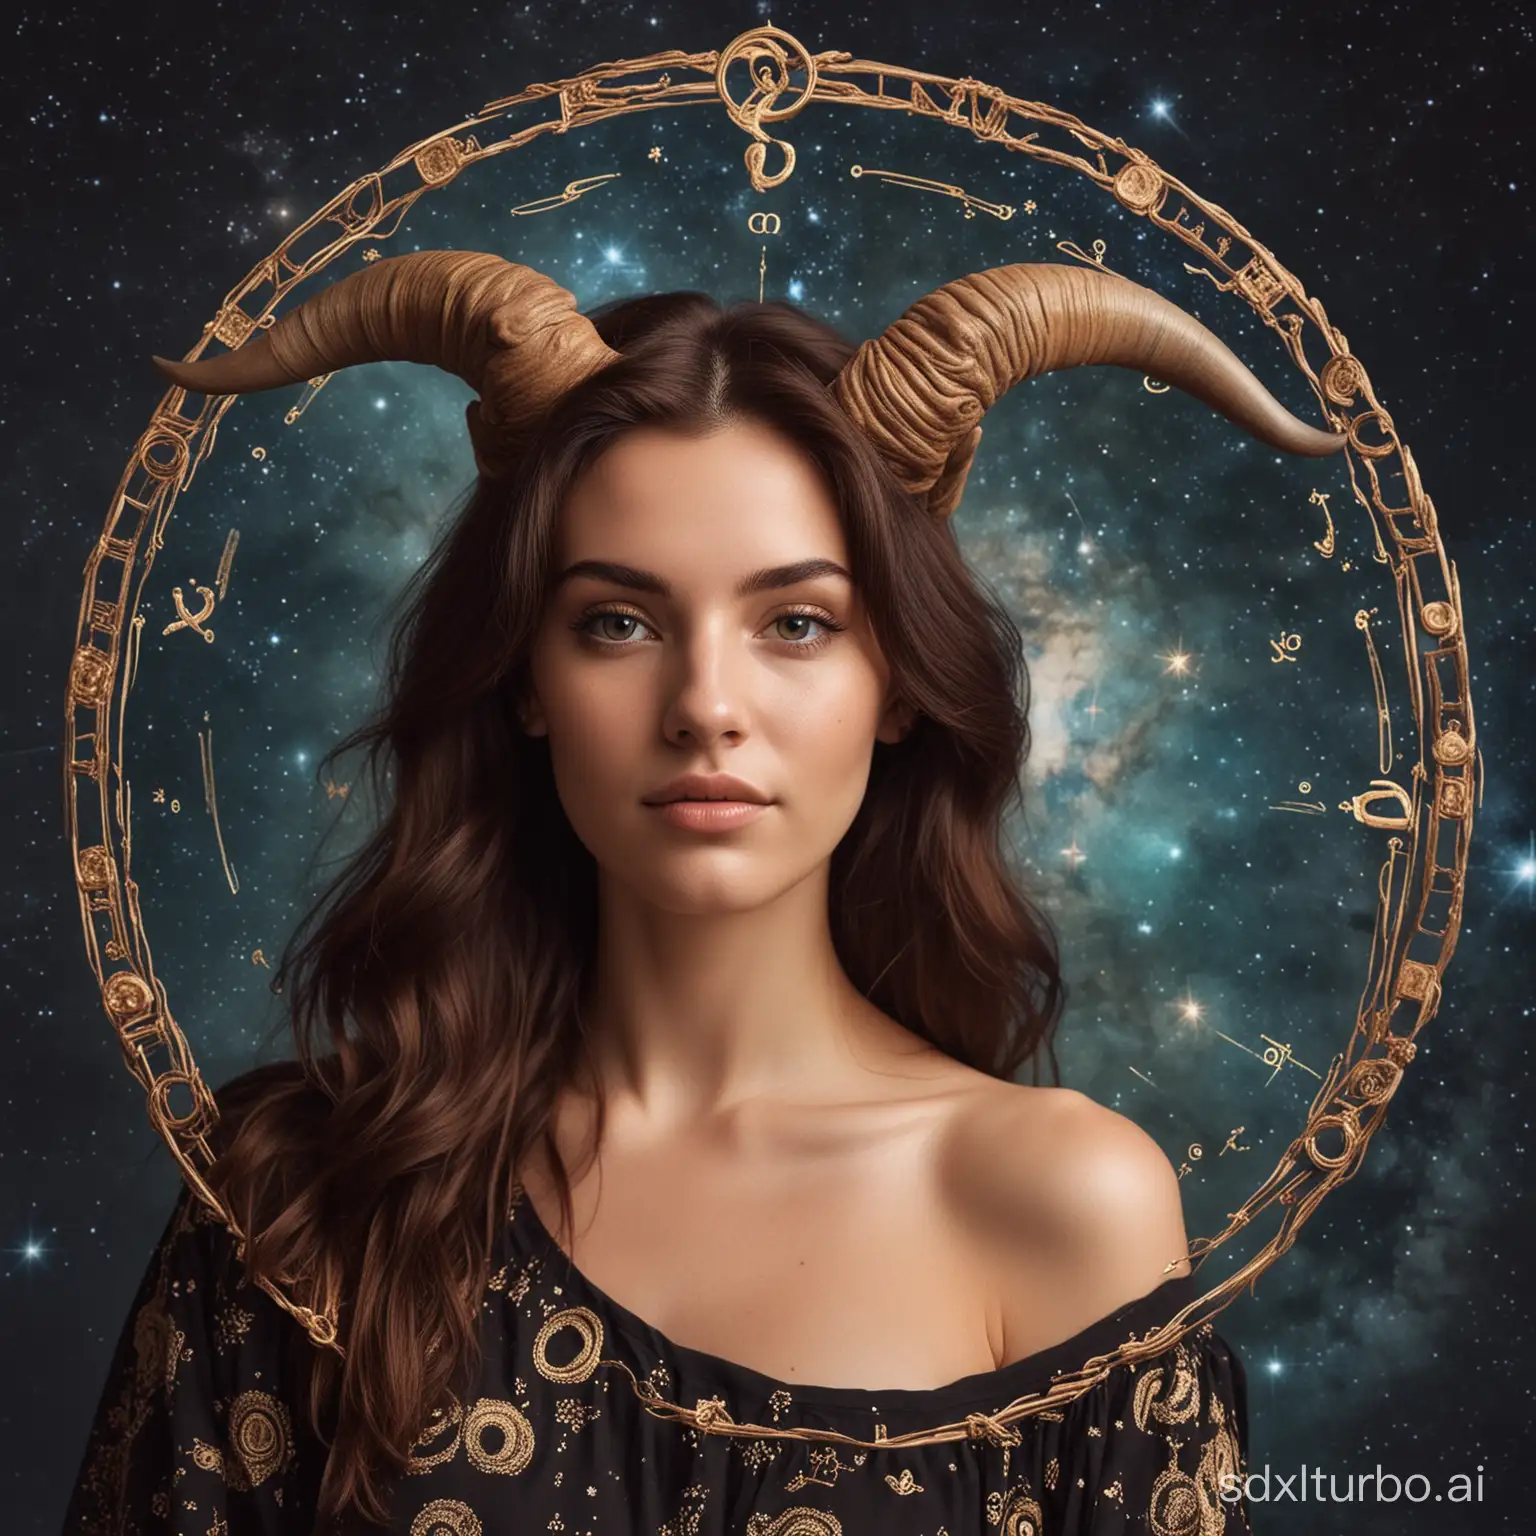 Take a photo of a woman who embodies the zodiac sign Taurus